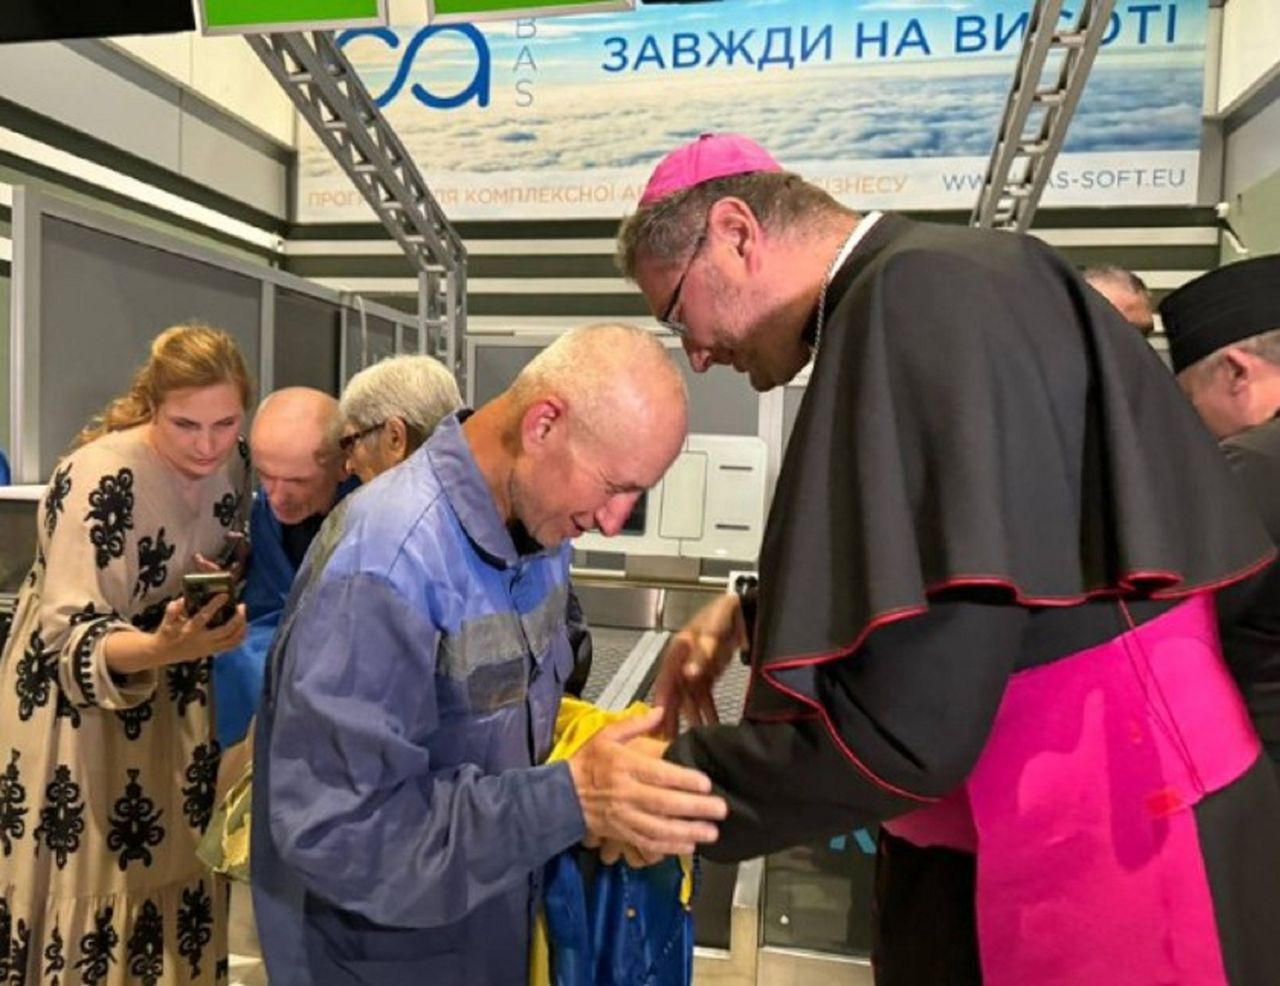 The priests freed from Russian captivity. They are already in Ukraine.